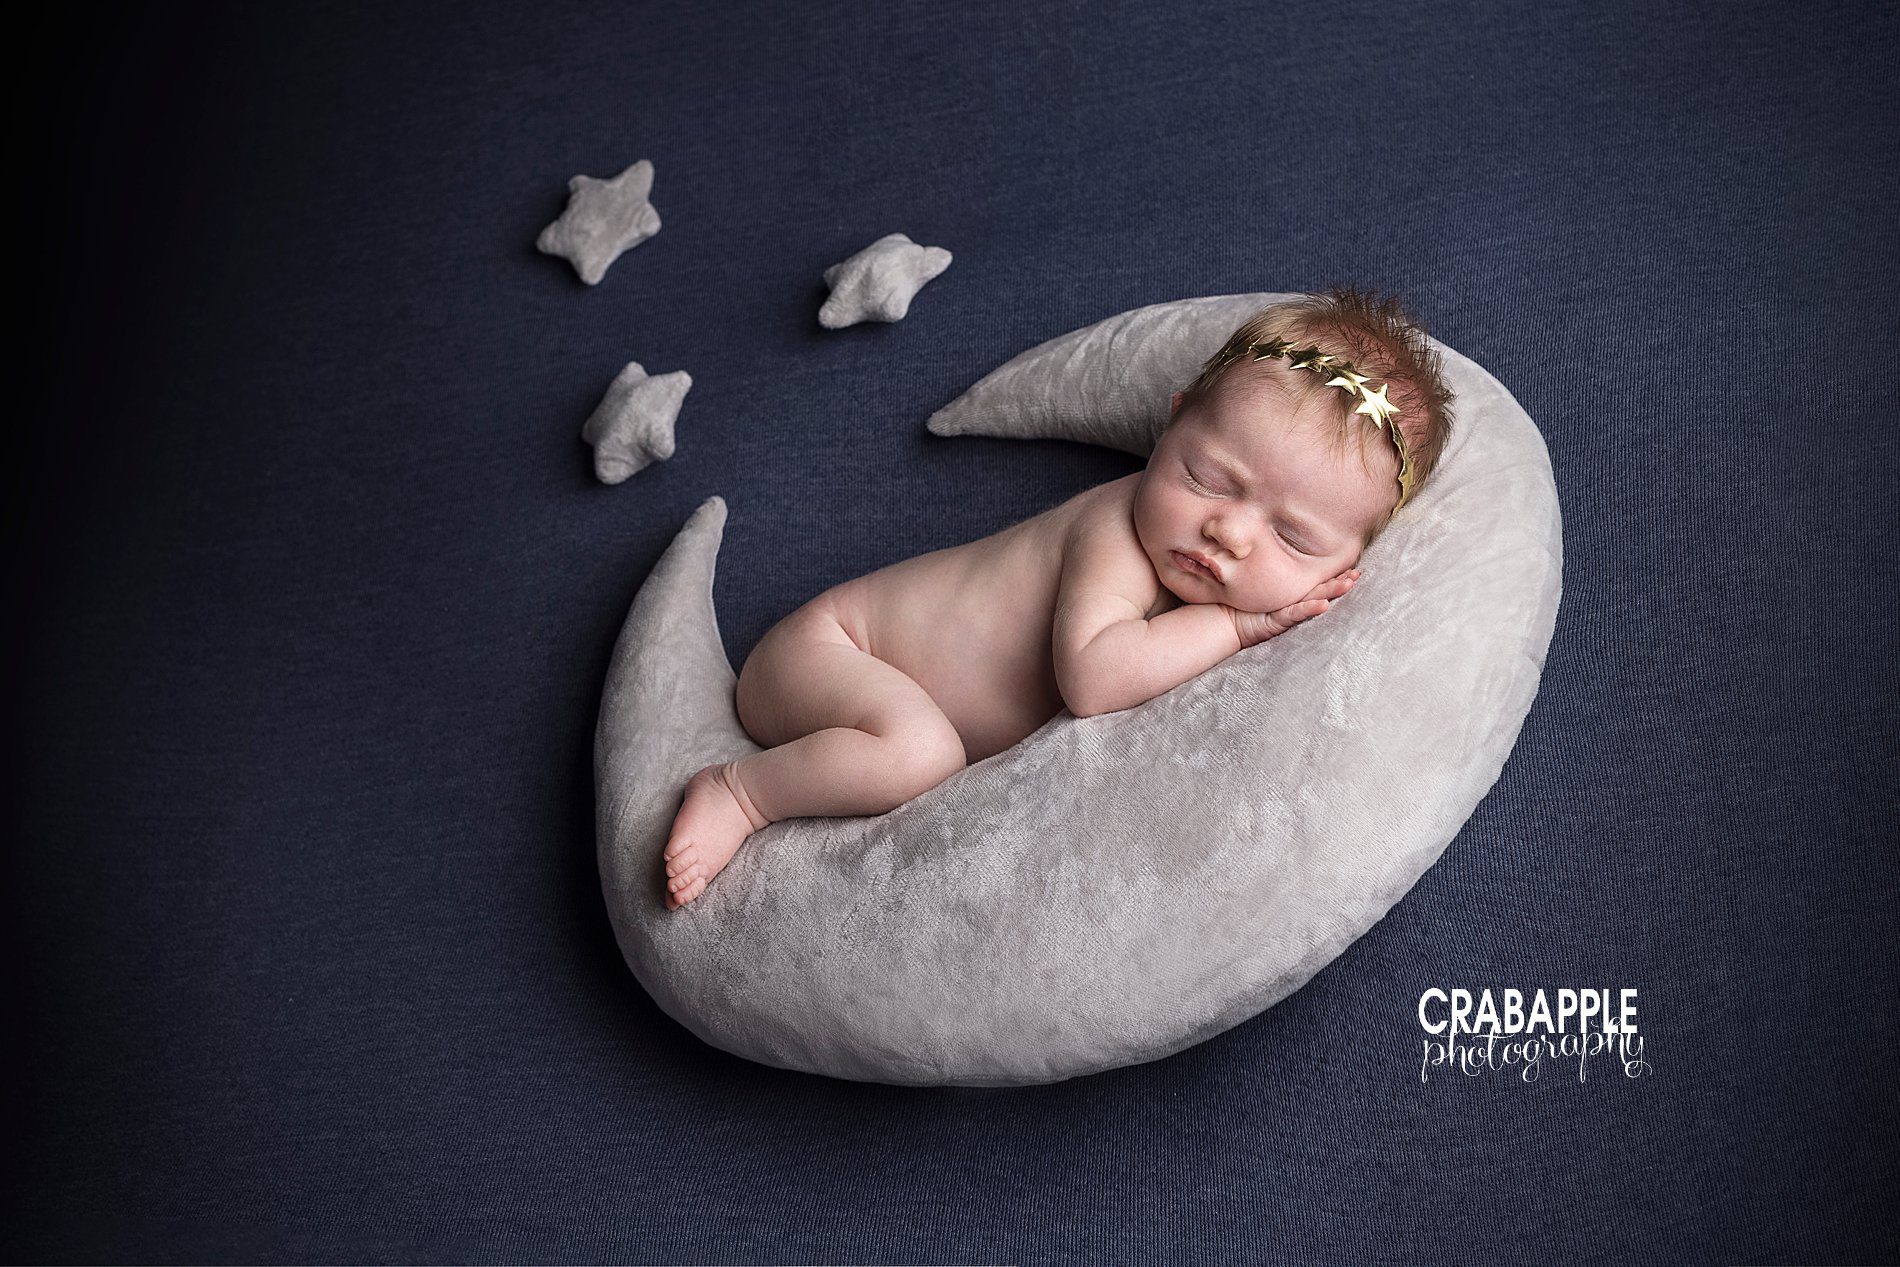 Moon themed newborn baby girl portraits using a crescent moon shaped pillow, small pillow stars, all on a navy blue blanket backdrop. Baby girl hugs the moon and wears a golden star headband.